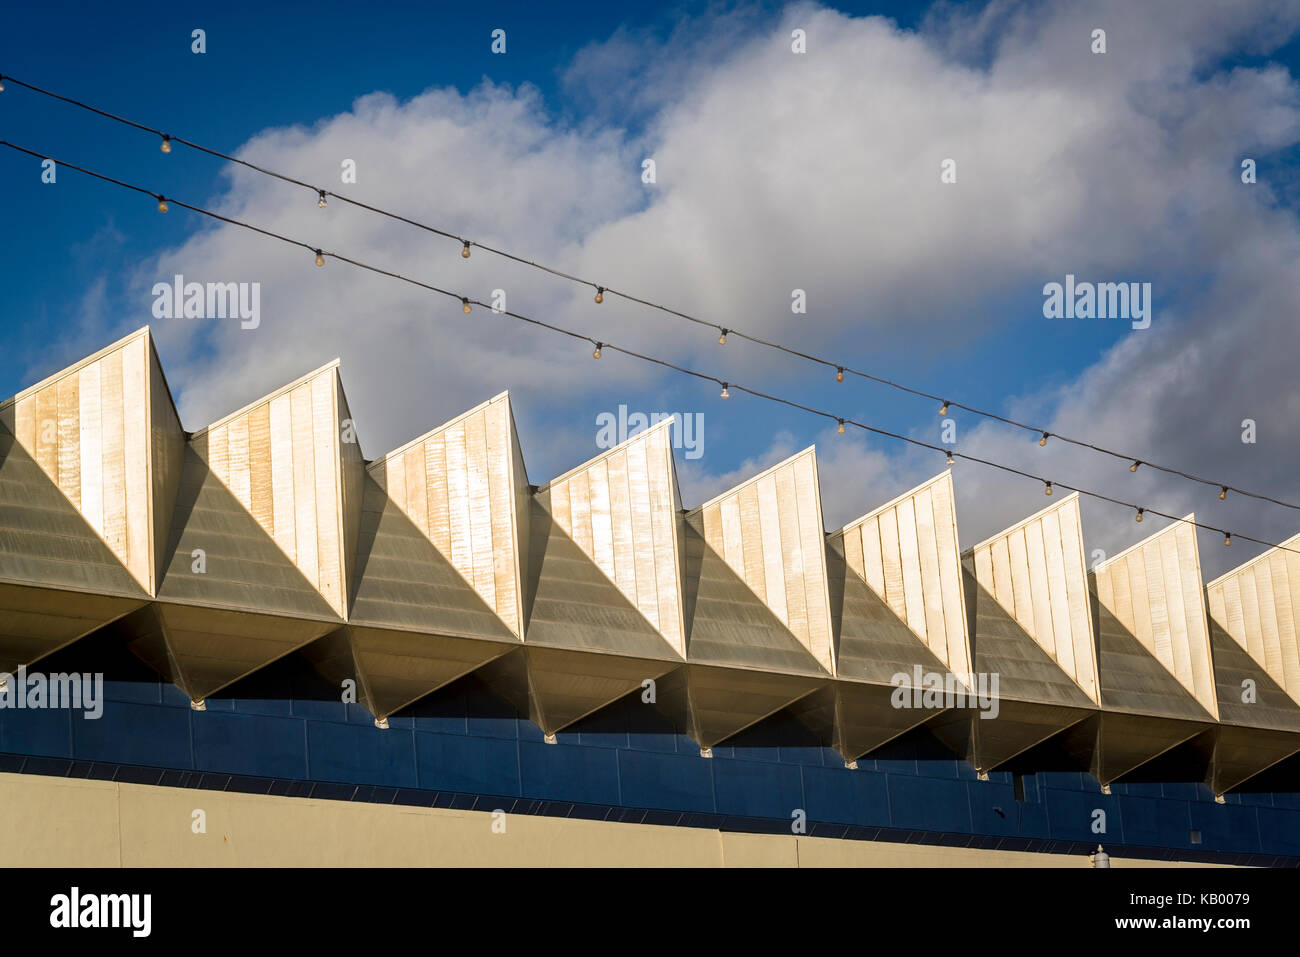 Roof of a building, Brighton, England, UK Stock Photo